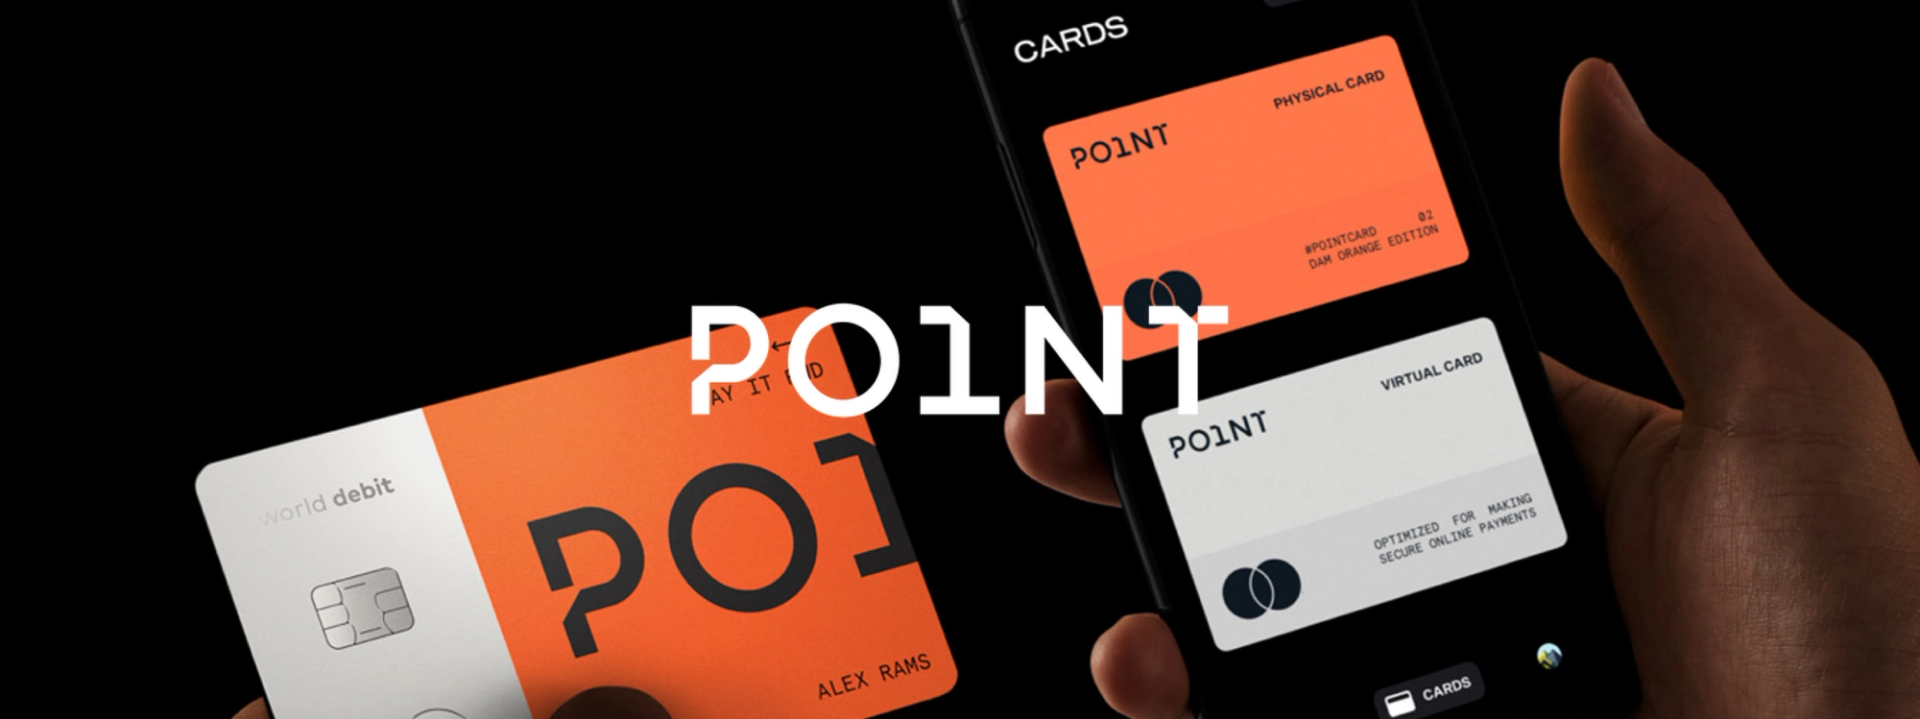 How PointCard Increased CTR 3.5X With Social Ads